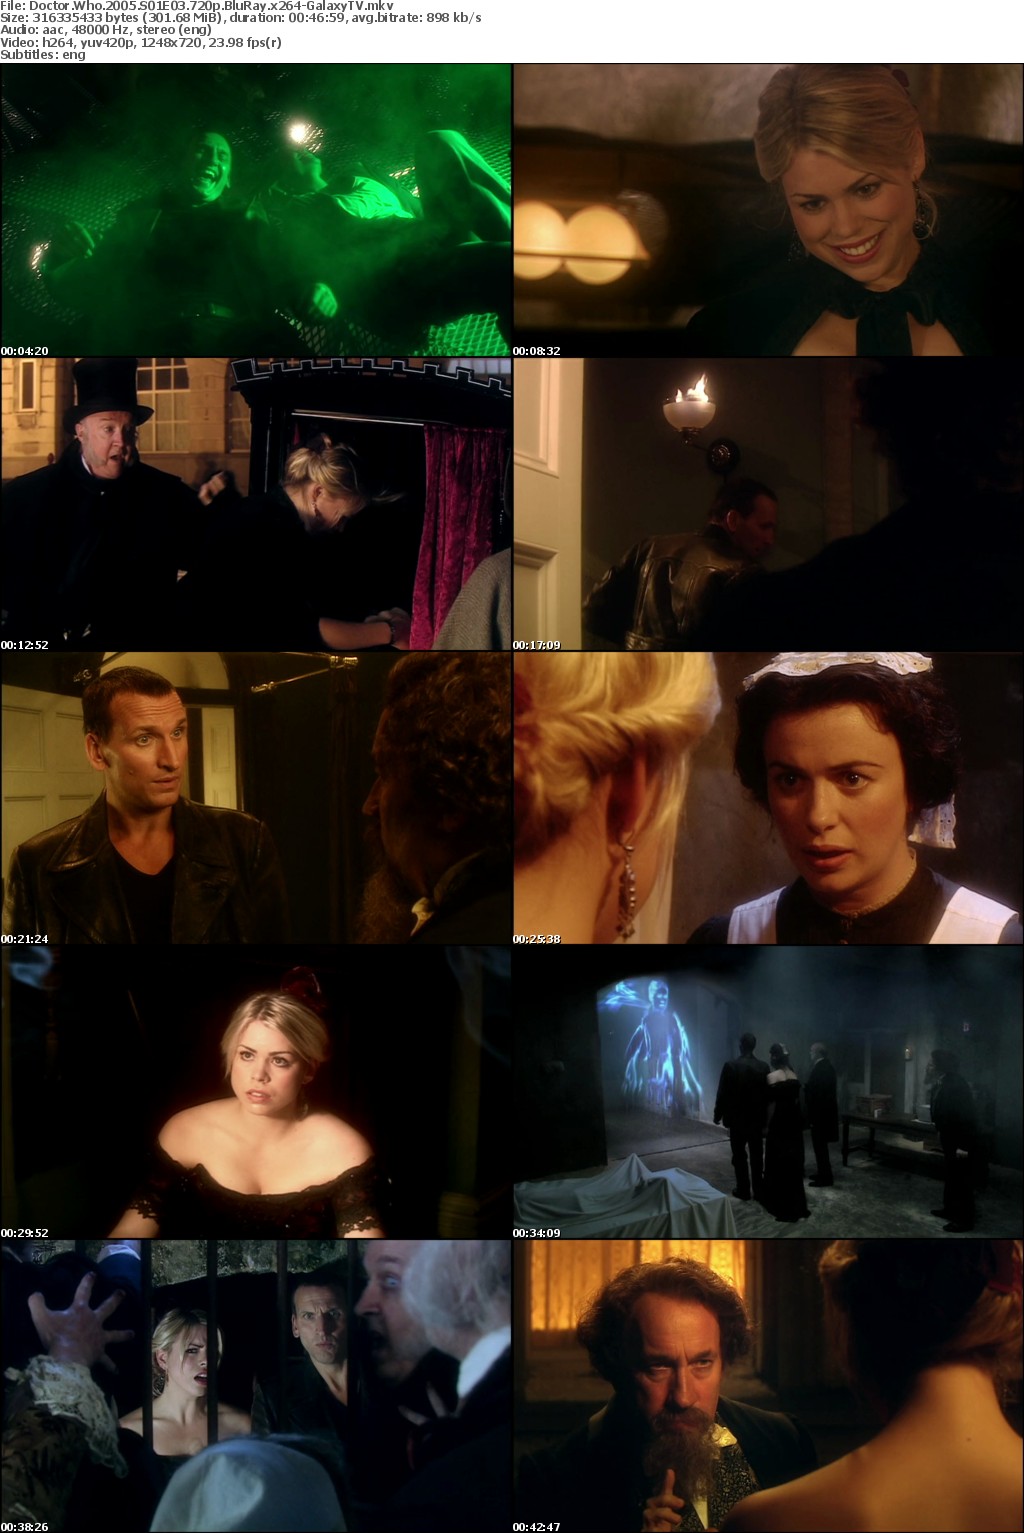 Doctor Who 2005 S01 COMPLETE 720p BluRay x264-GalaxyTV